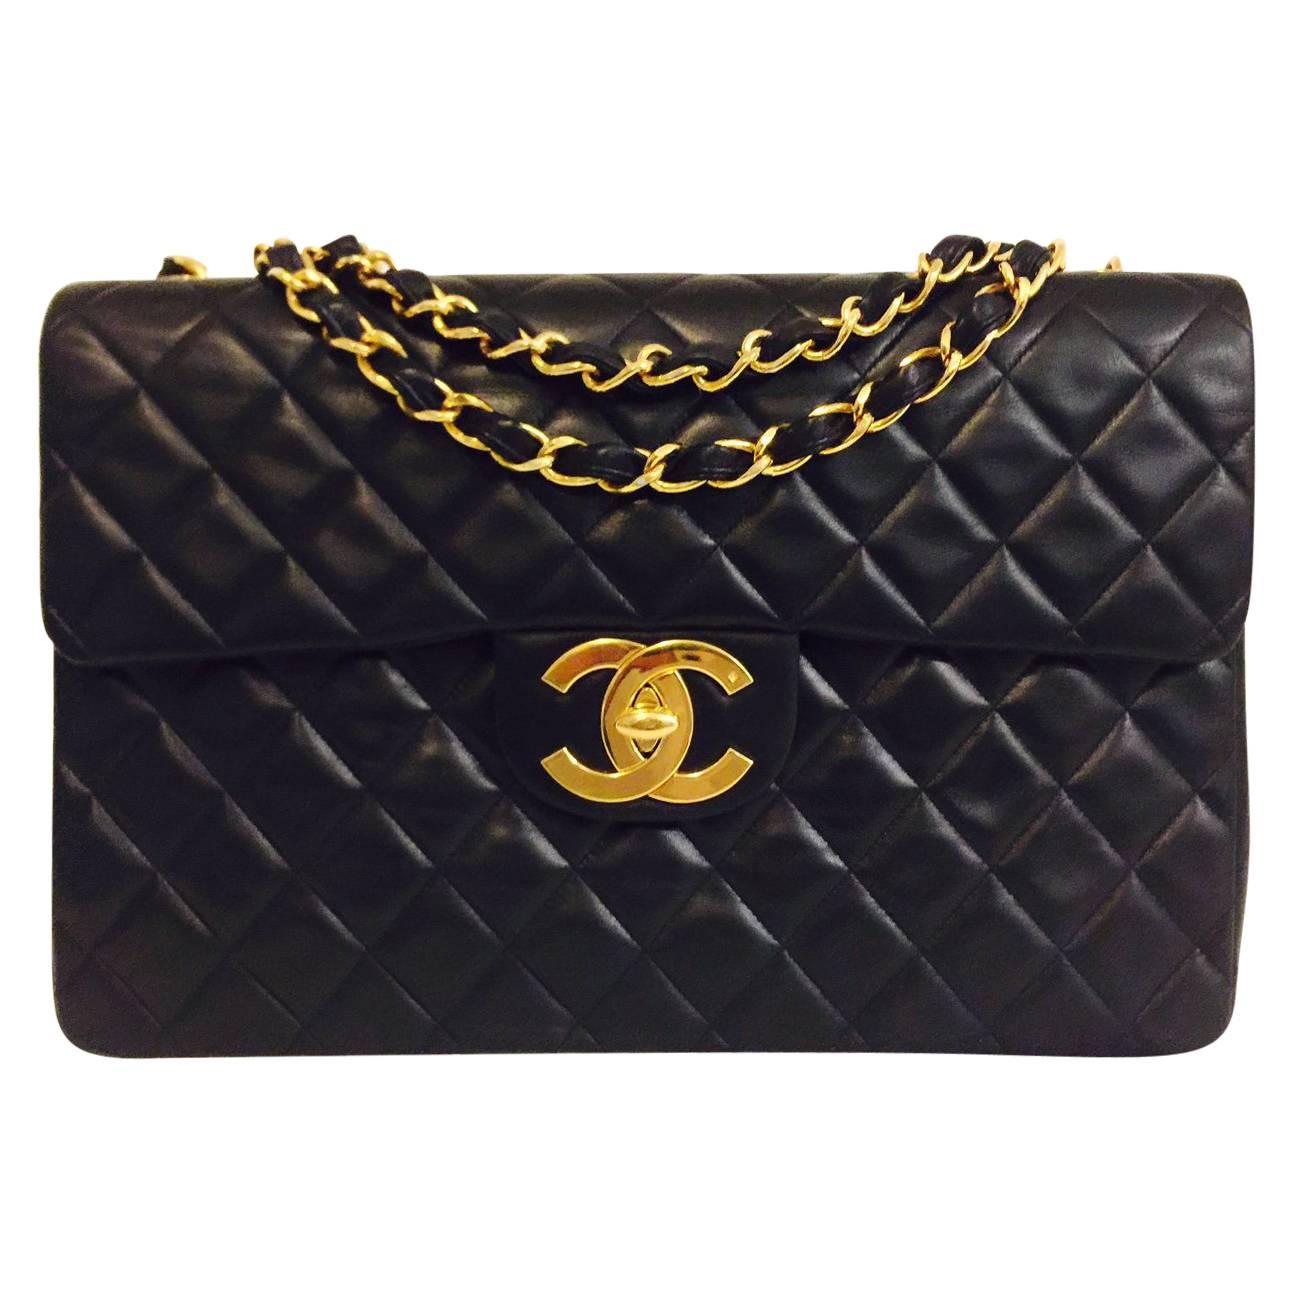 Classic Chanel Single Flap Handbag in Black Quilted Lambskin